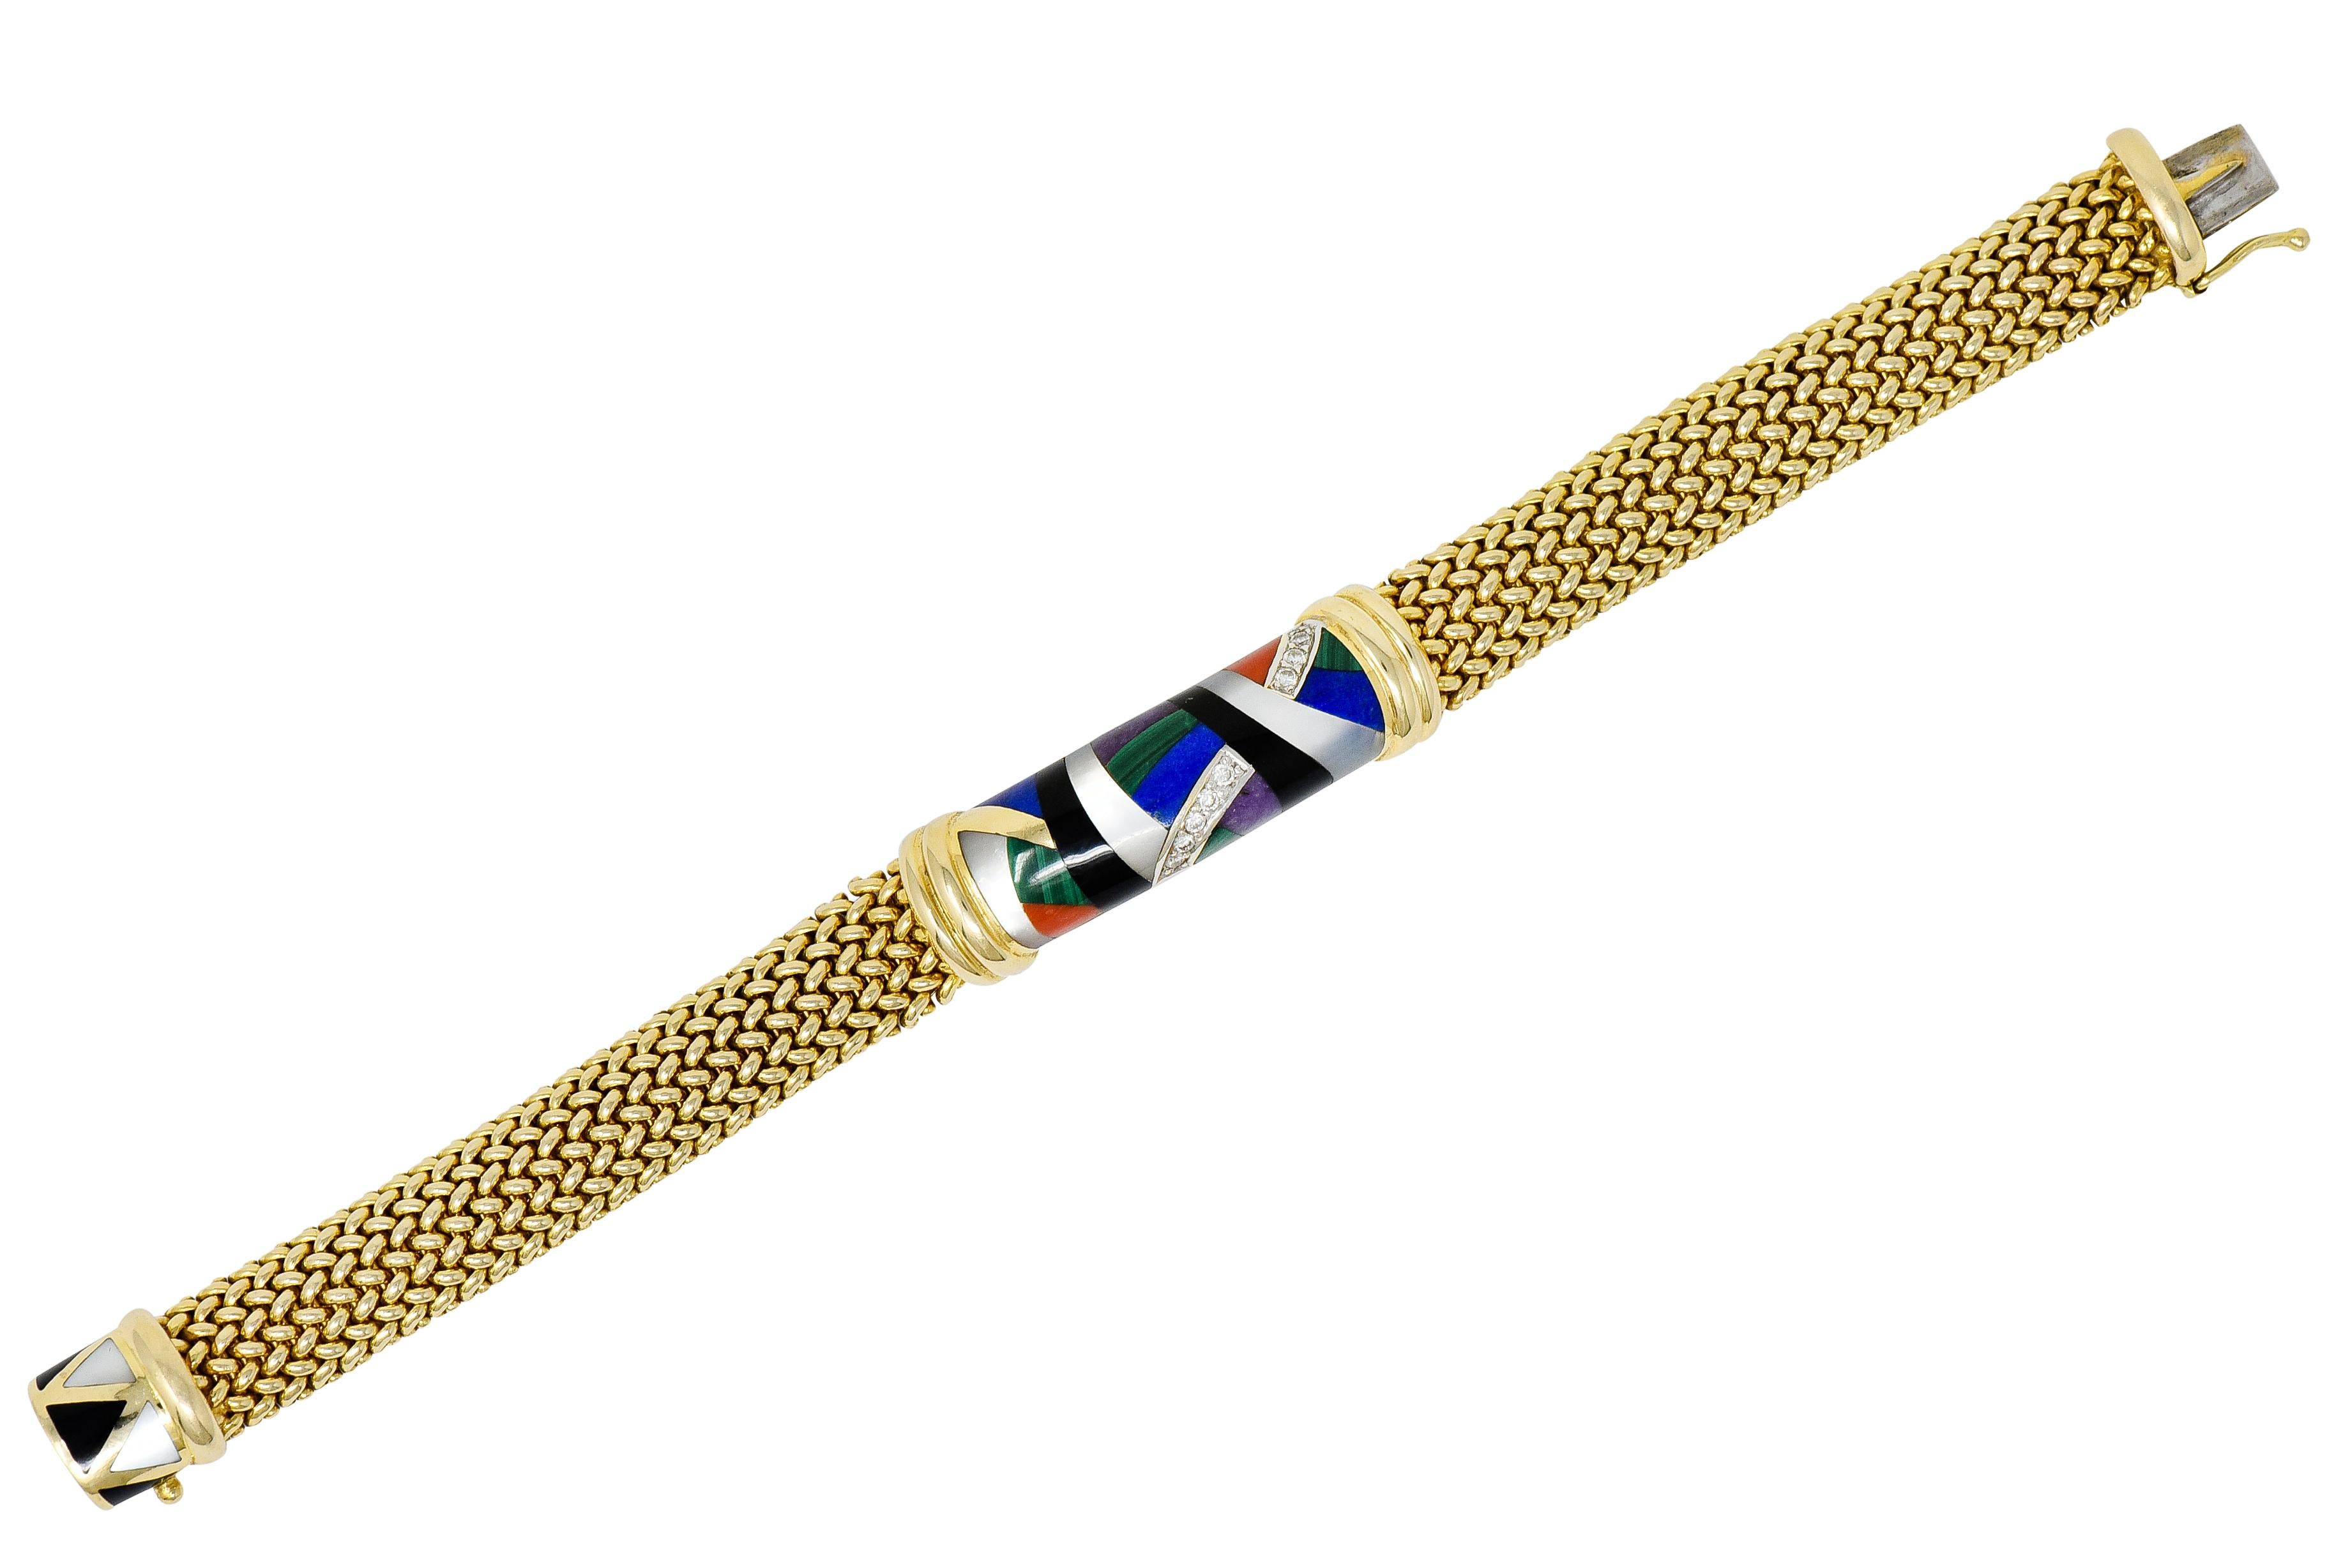 Mesh style bracelet with a central barrel shaped station with deeply ridged gold endcaps

Station is designed as an inlay mosaic of mother-of-pearl, coral, onyx, malachite, and others

Accented by a waved row of round brilliant cut diamonds weighing